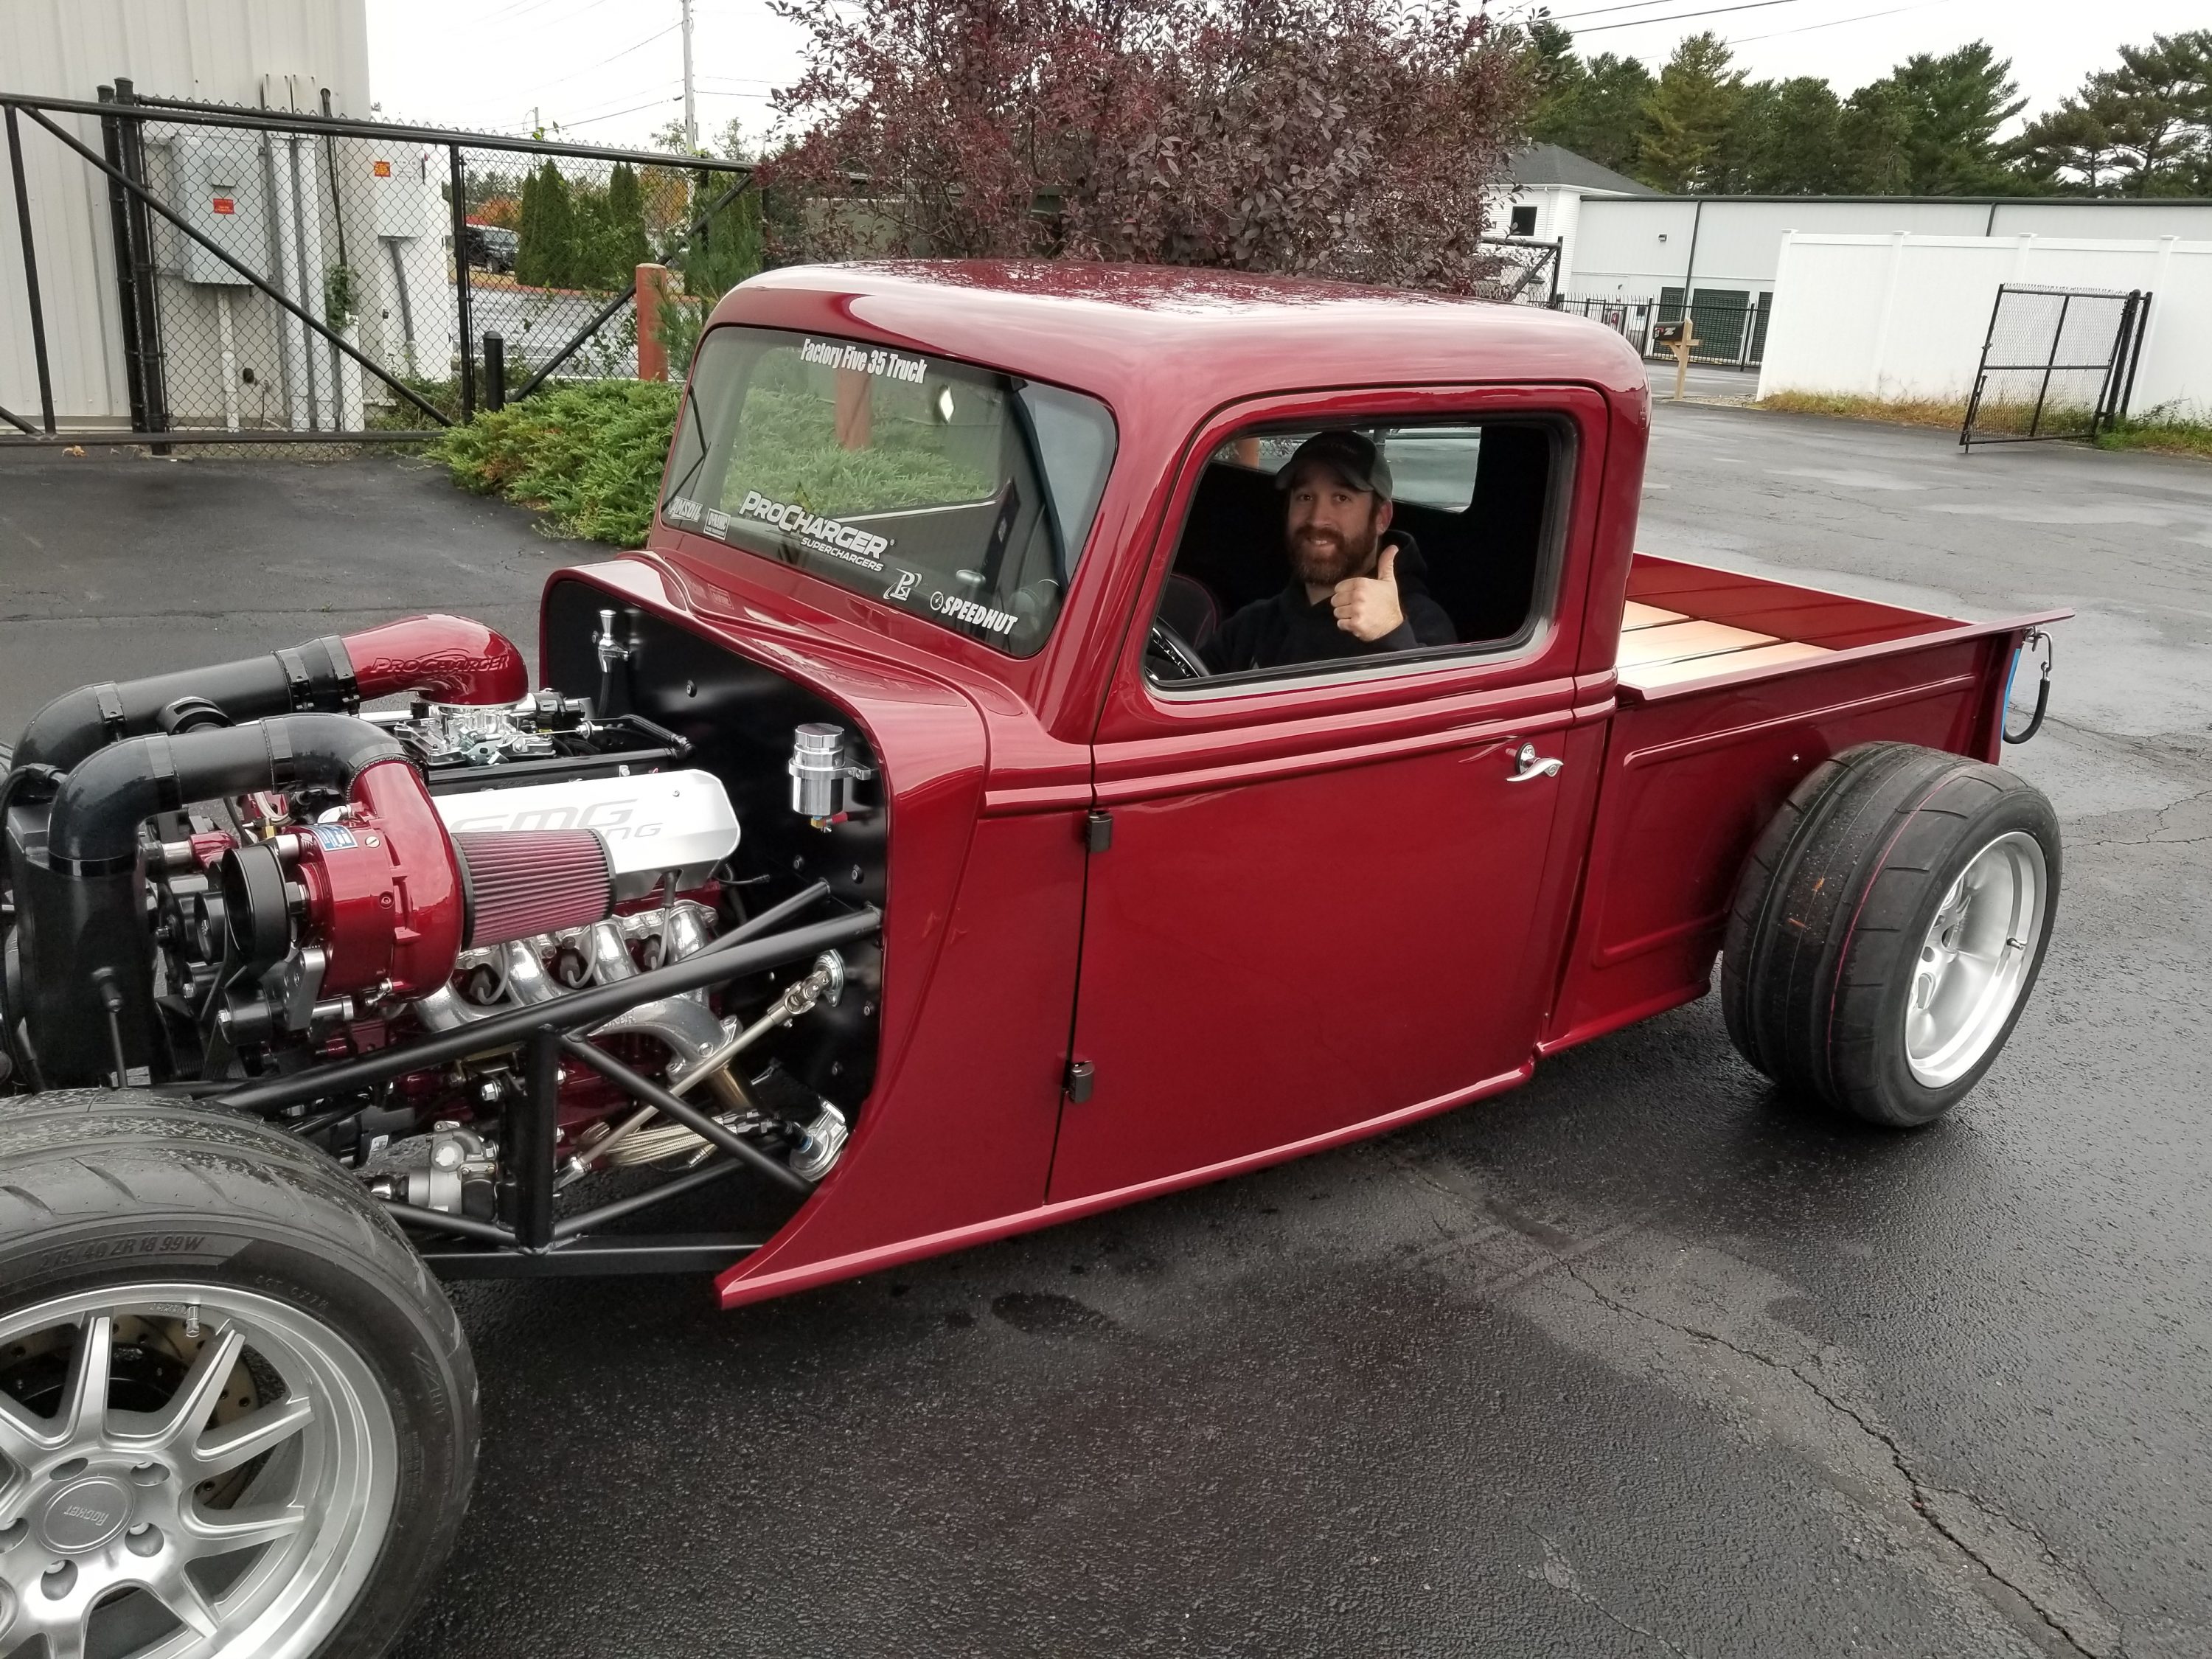 GALLERY Hot Rod Truck Built by Freddy at SMG Motoring.